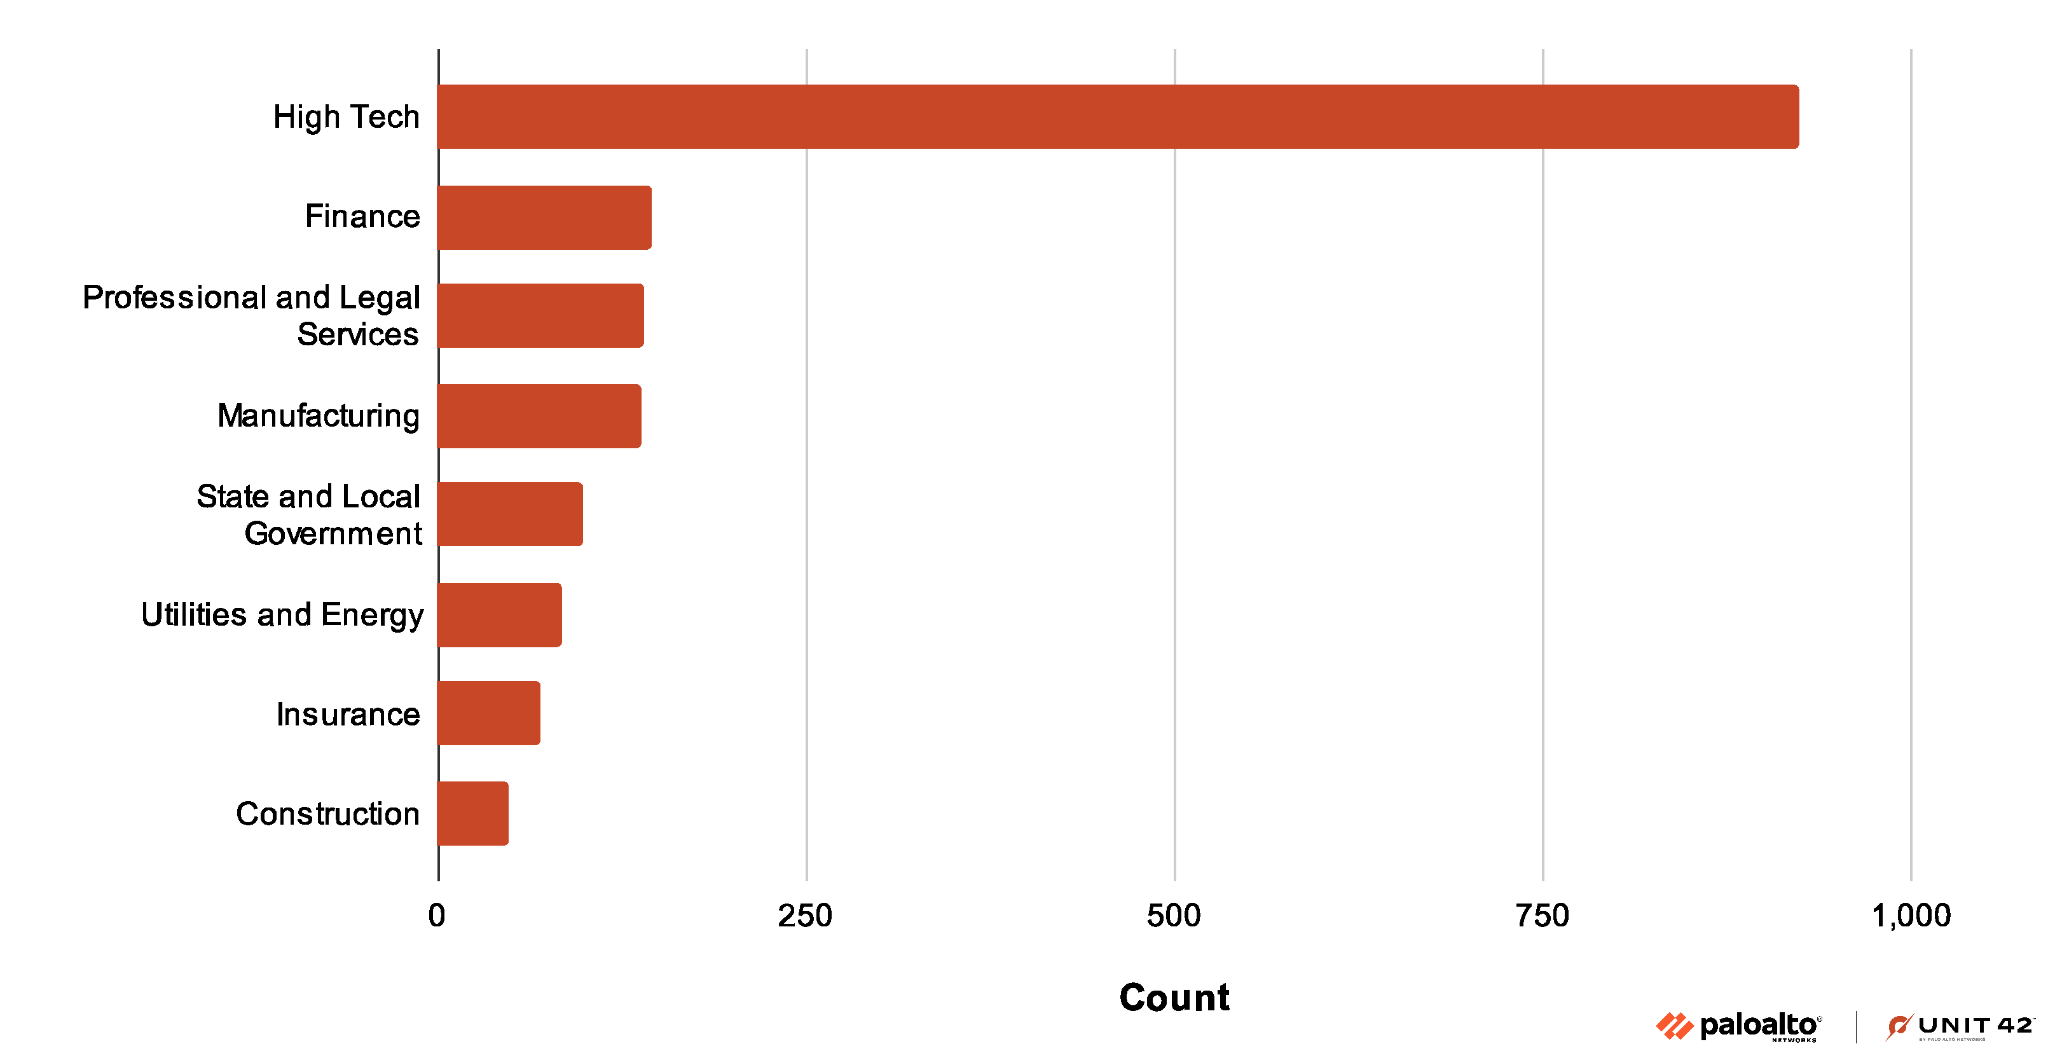 Image 4 is a bar chart of the count of industries affected by StrelaStealer. The first is high technology, which has the most at almost 1,000. The other seven industries have less than 250 counts each. This includes finance, professional and legal services, manufacturing, state and local government, utilities and energy, insurance and construction.